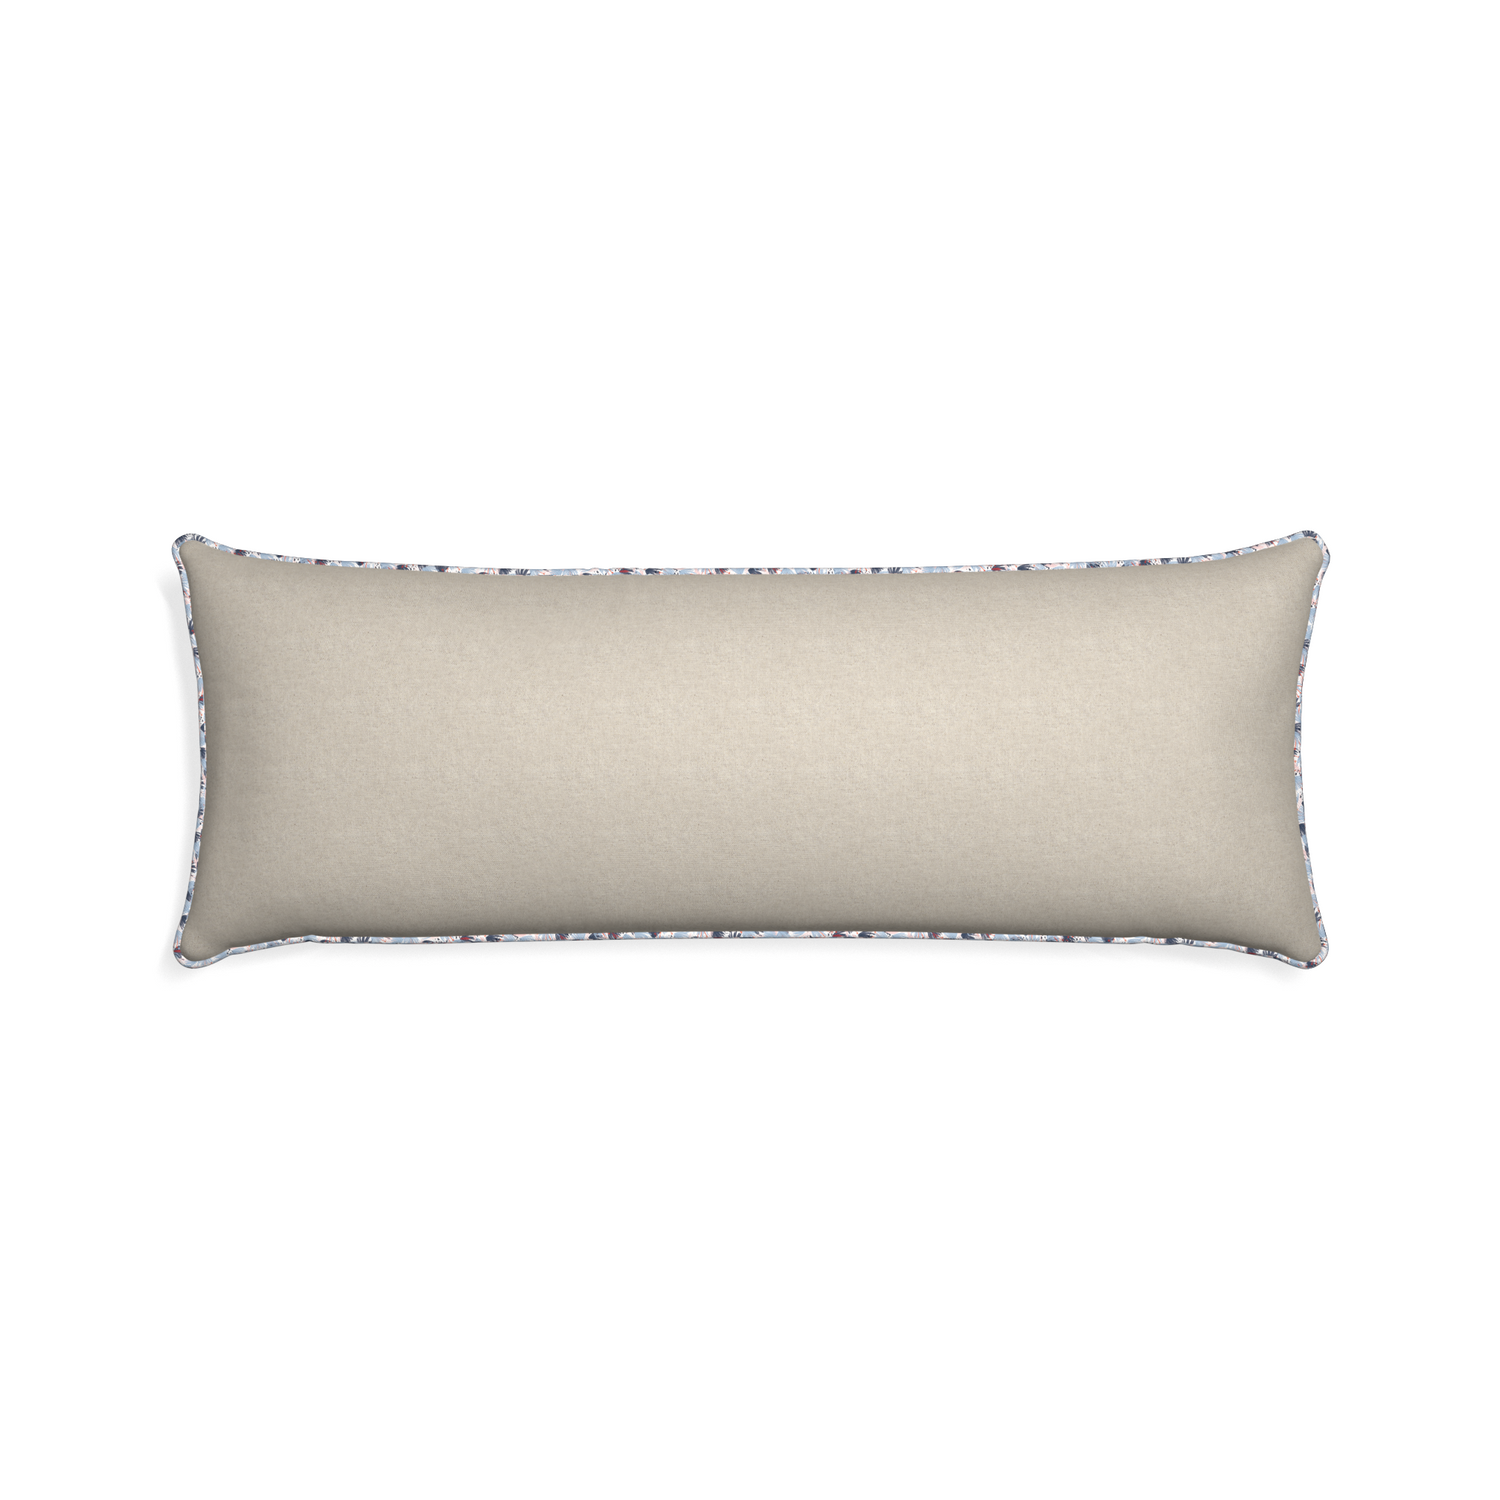 Xl-lumbar oat custom light brownpillow with e piping on white background